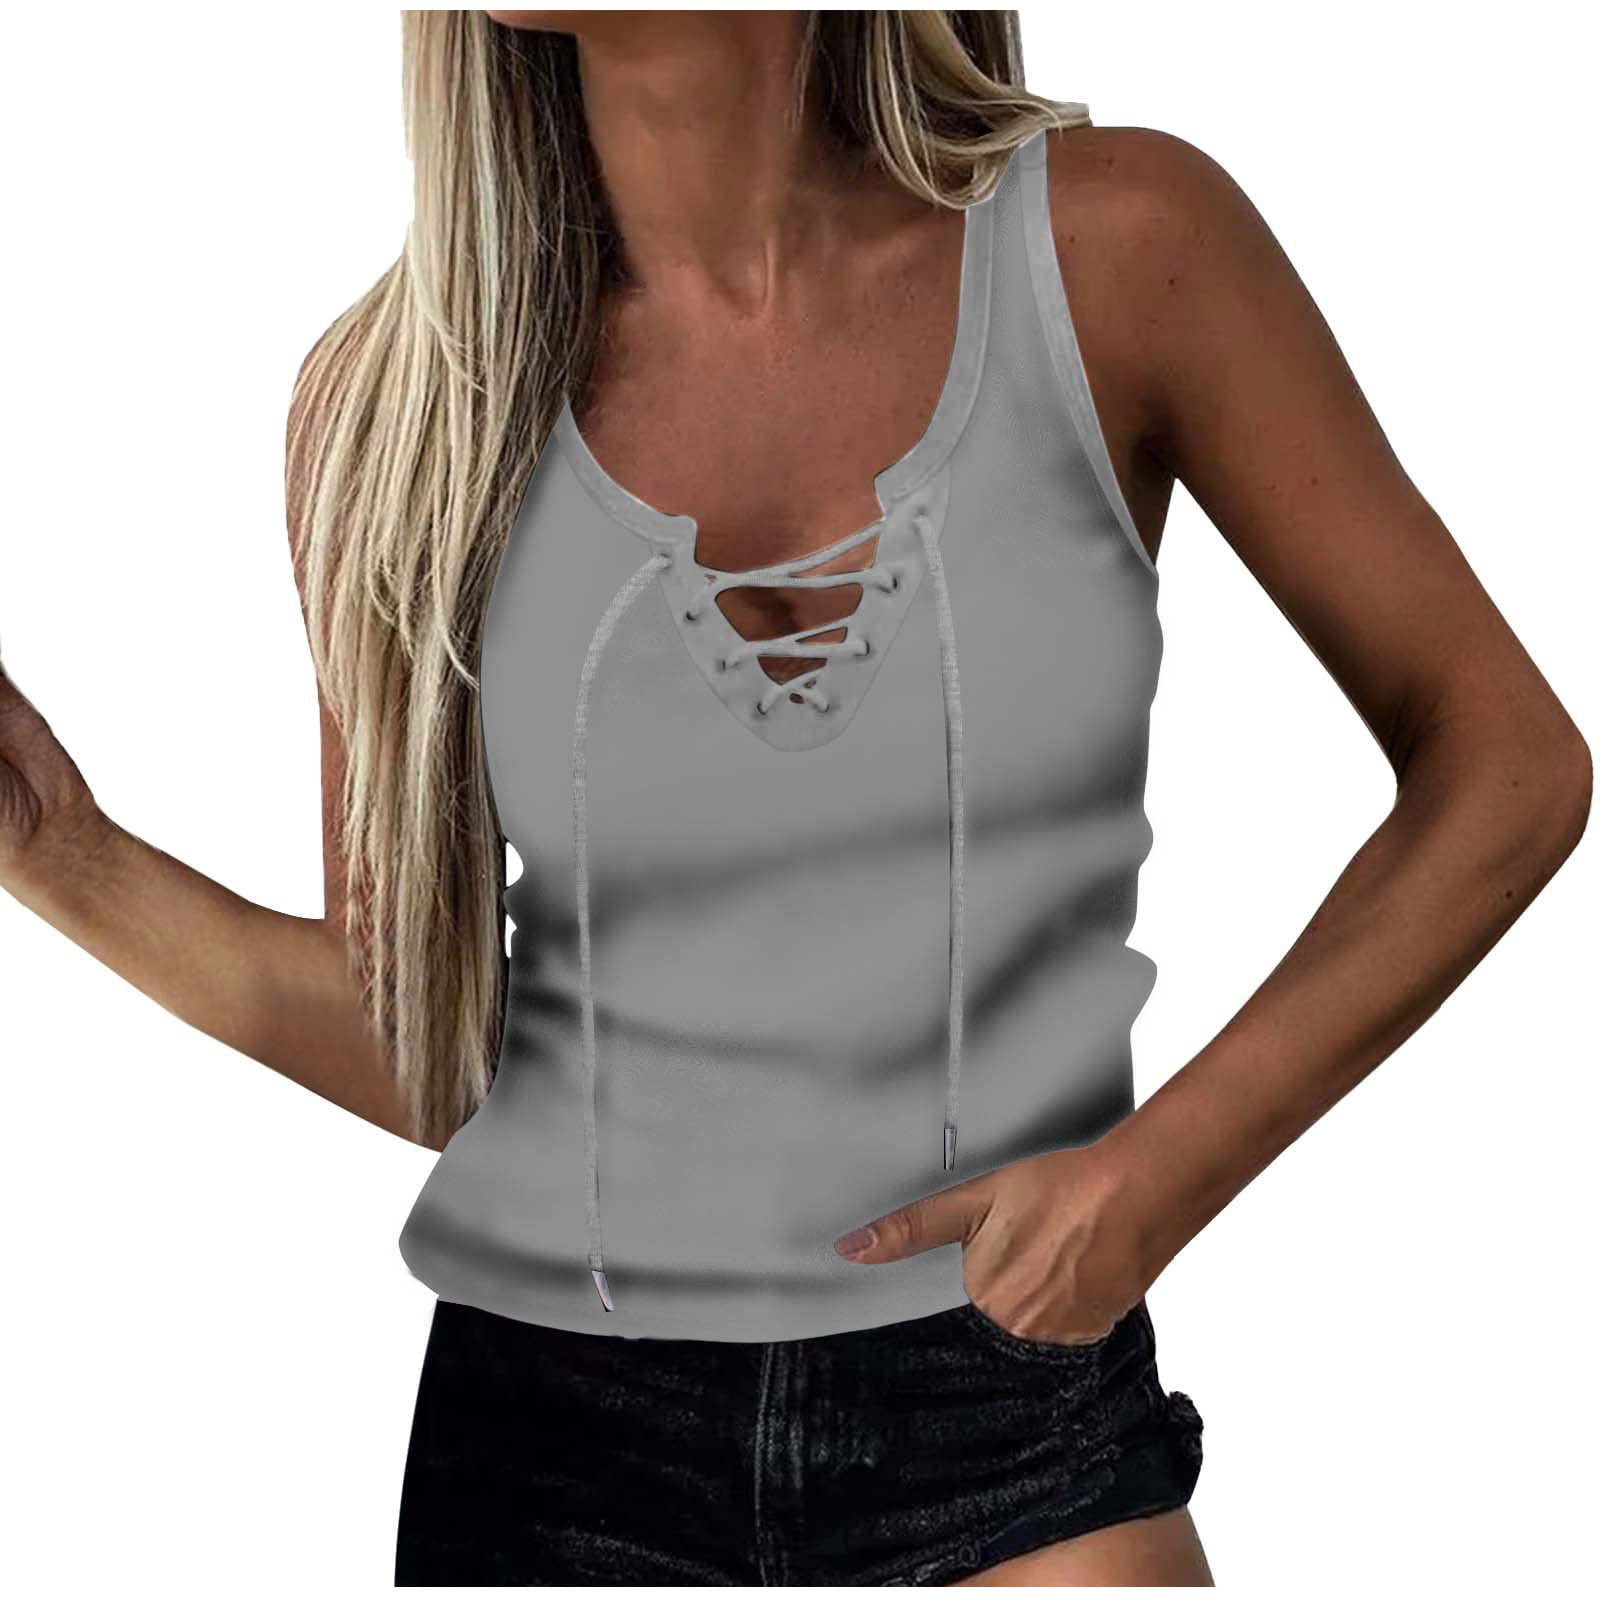 Toponly Comfortable Tank Tops Sweet Solid Simple Yoga Woman Tops Sports Racerback Elastic Sleeveless Casual Fitness Pullover T Shirt Plus Size 